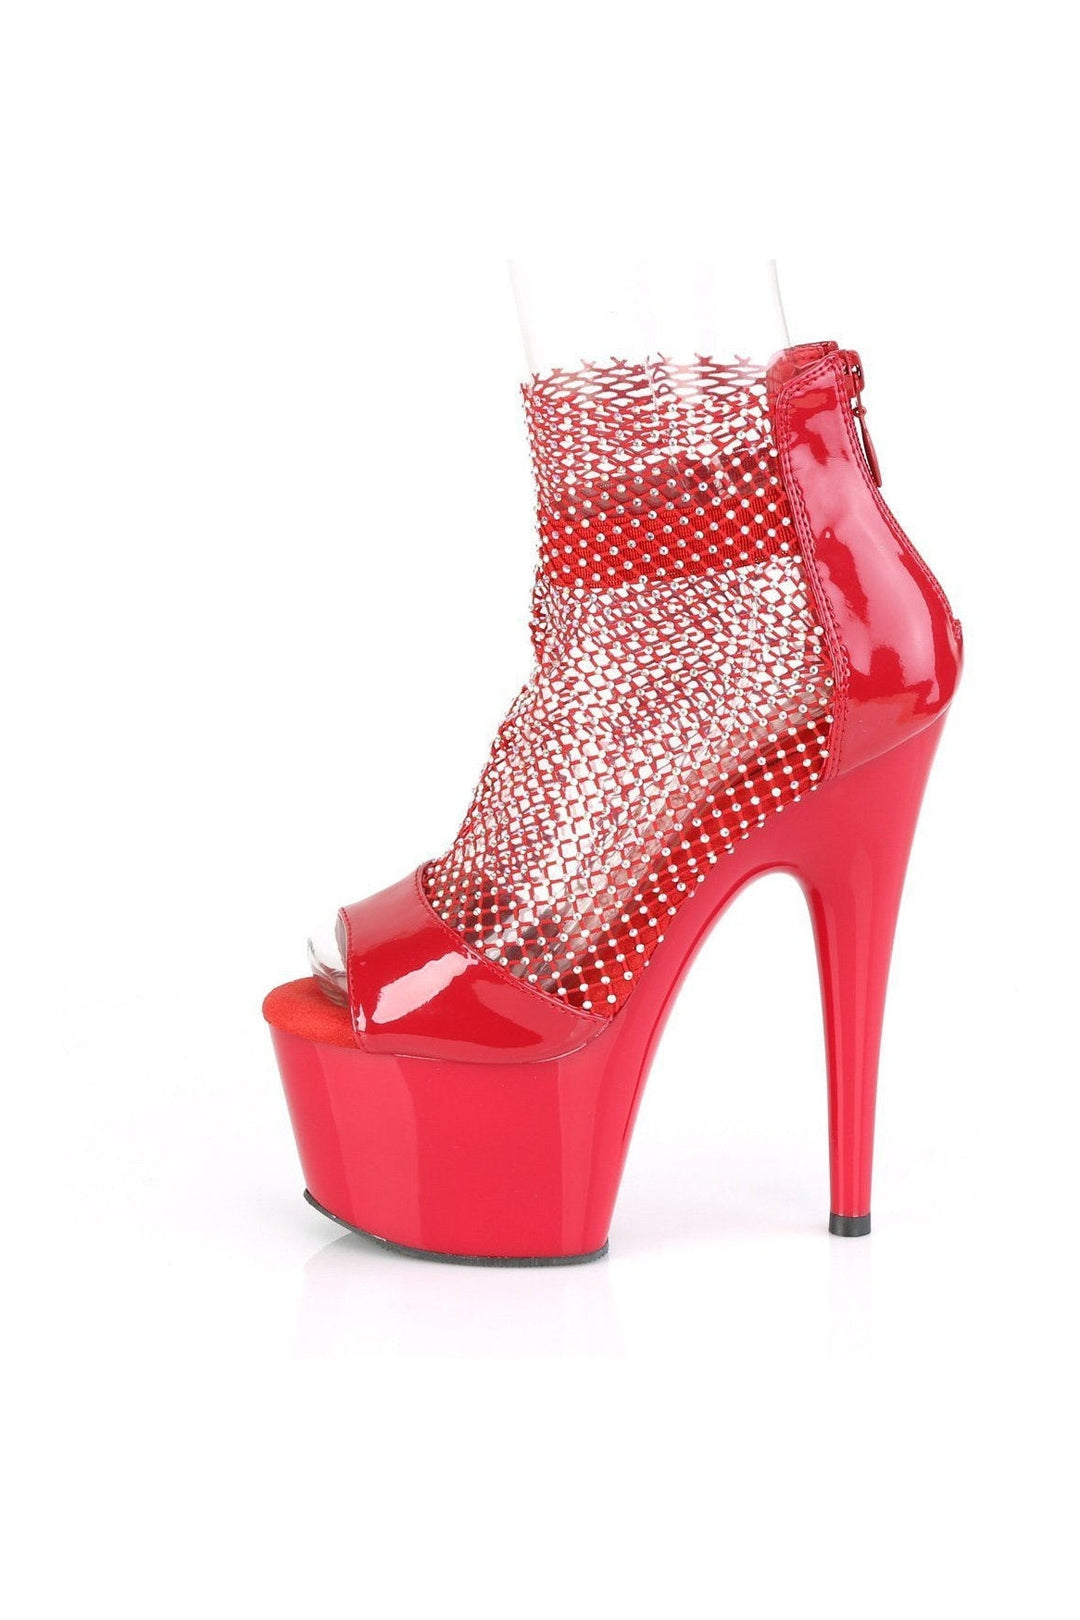 ADORE-765RM Exotic Sandal | Red Patent-Sandals-Pleaser-SEXYSHOES.COM